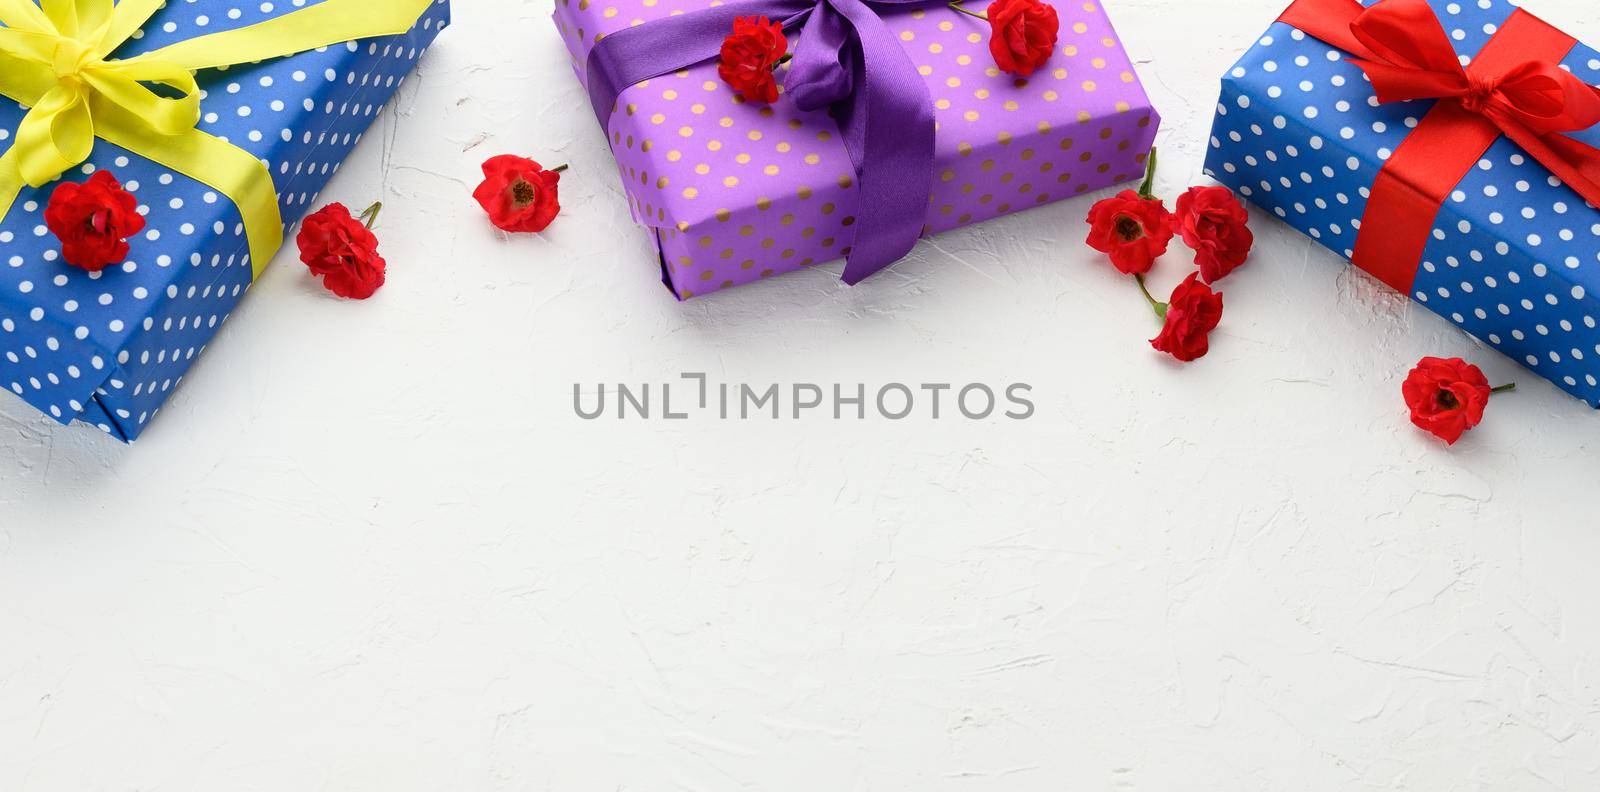 boxes are packed in holiday paper with polka dots and tied with a silk ribbon on a background, birthday gift, surprise, copy space